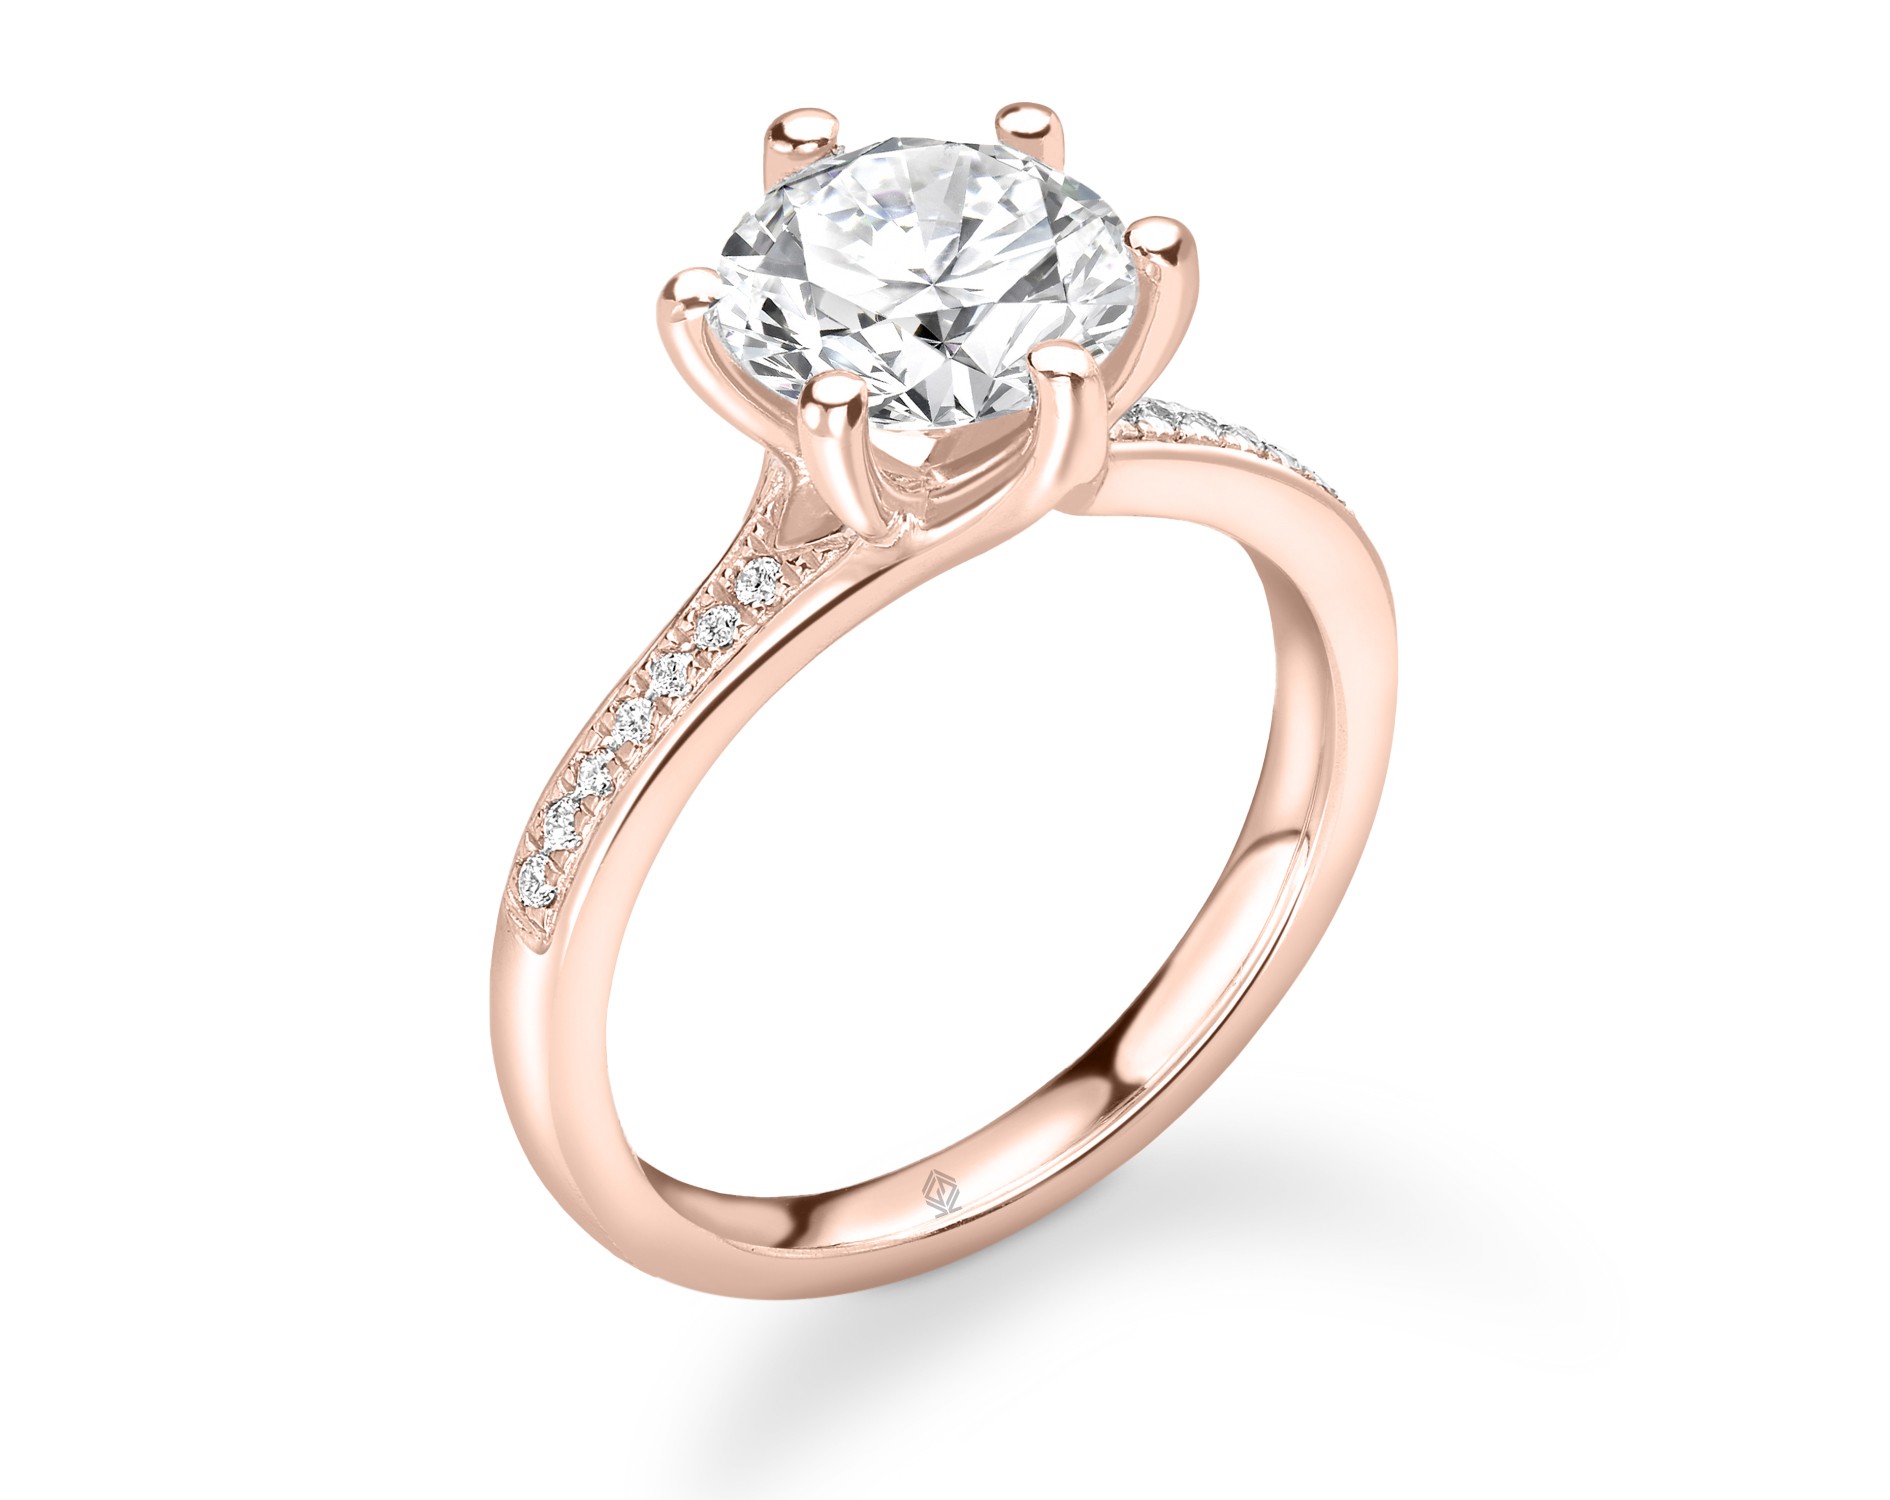 18K ROSE GOLD ROUND CUT 6 PRONGS DIAMOND ENGAGEMENT RING WITH CHANNEL SET SIDE STONES